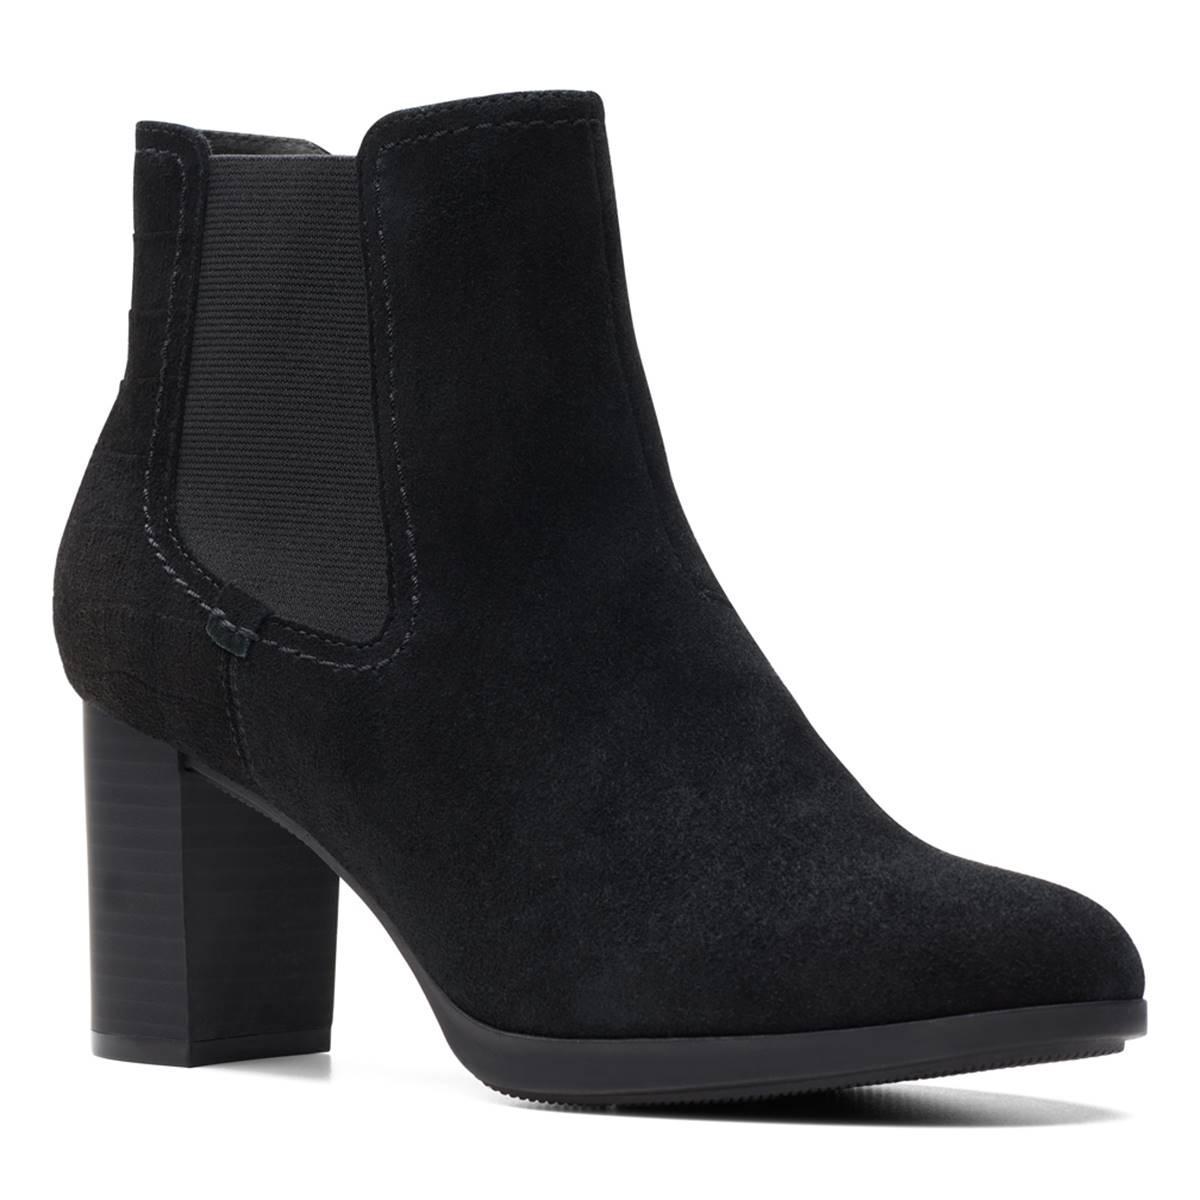 Clarks Bayla Rose Suede) Women's Boots Product Image